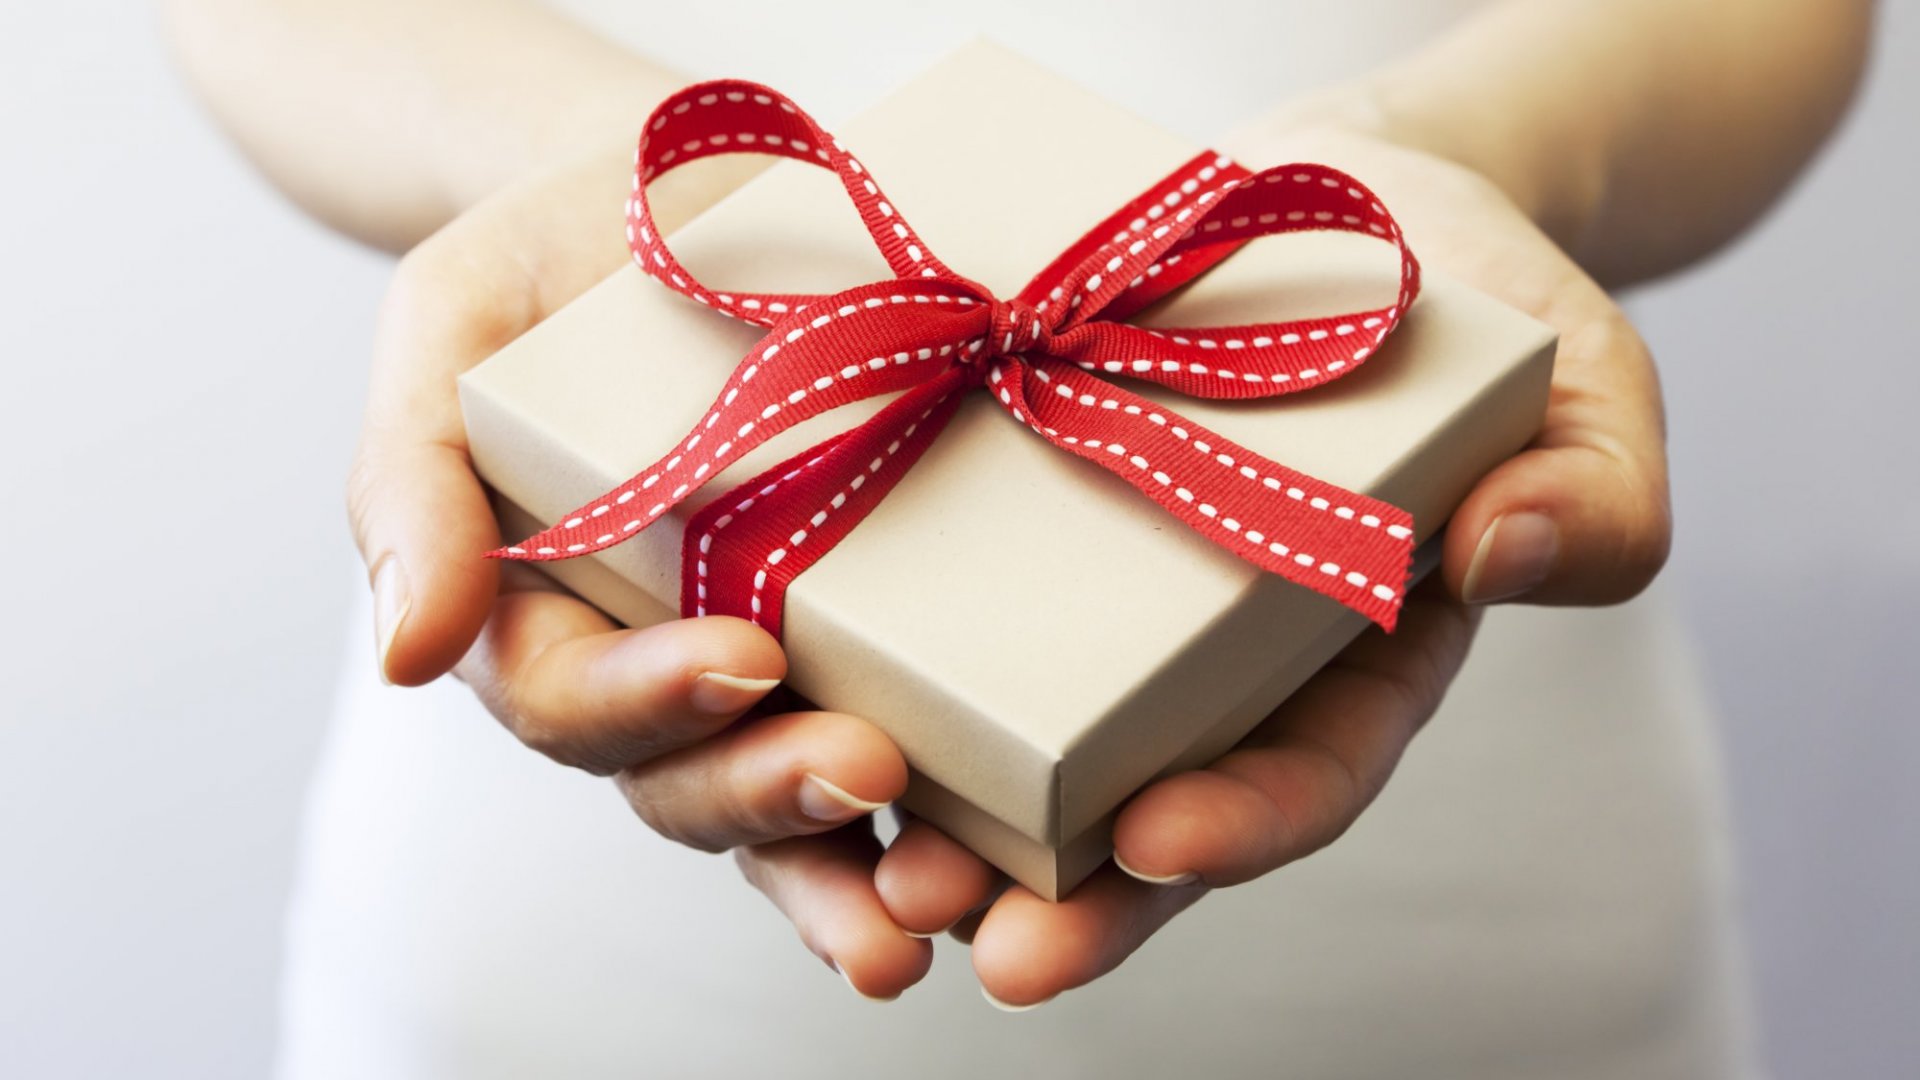 Five Meaningful Gift Ideas for Anyone in Your Life